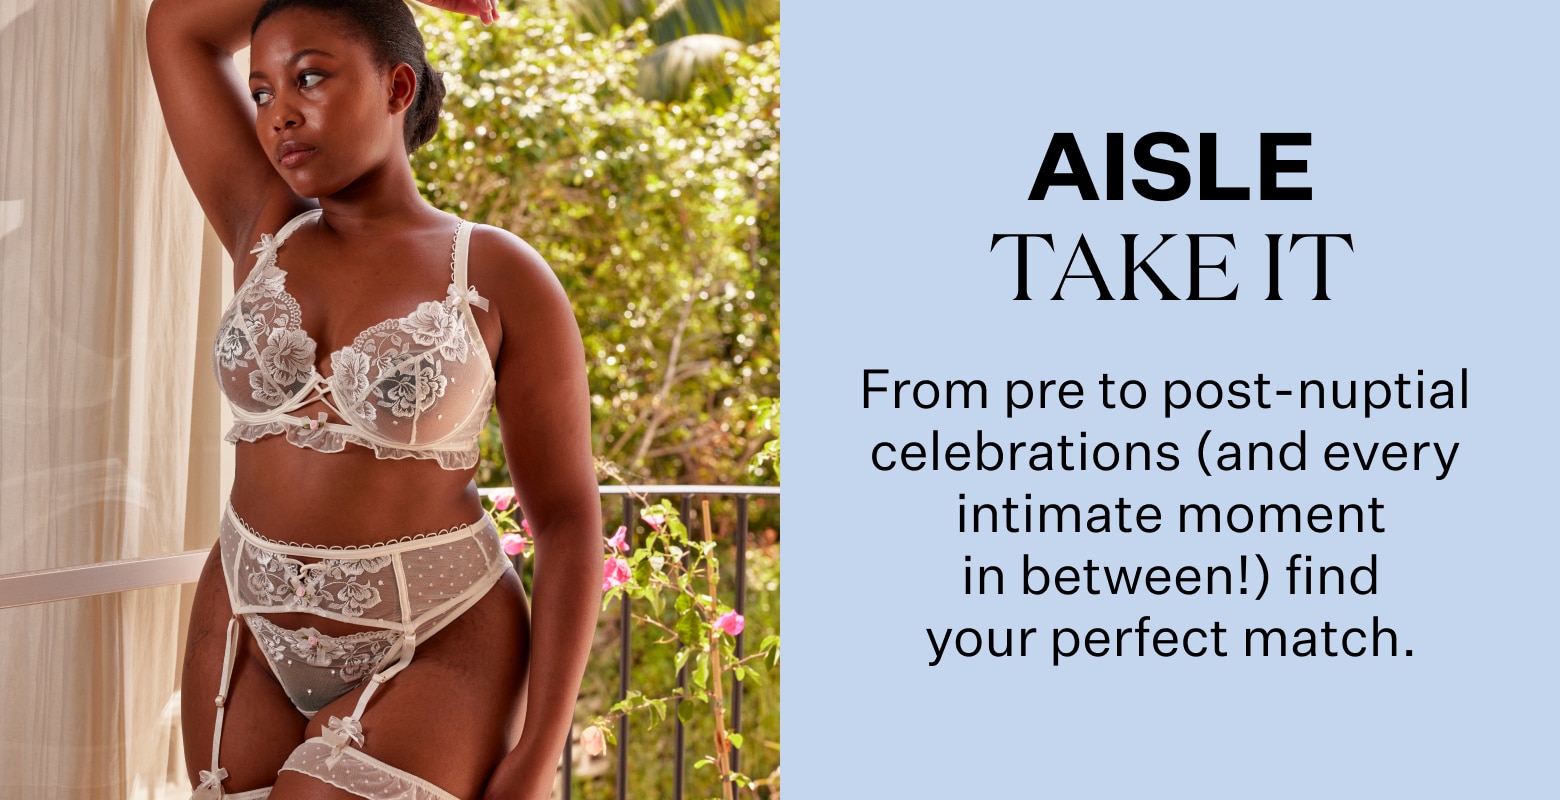 Aisle Take It. From pre to post-nuptial celebrations (And every intimate moment in between!) find your perfect match.